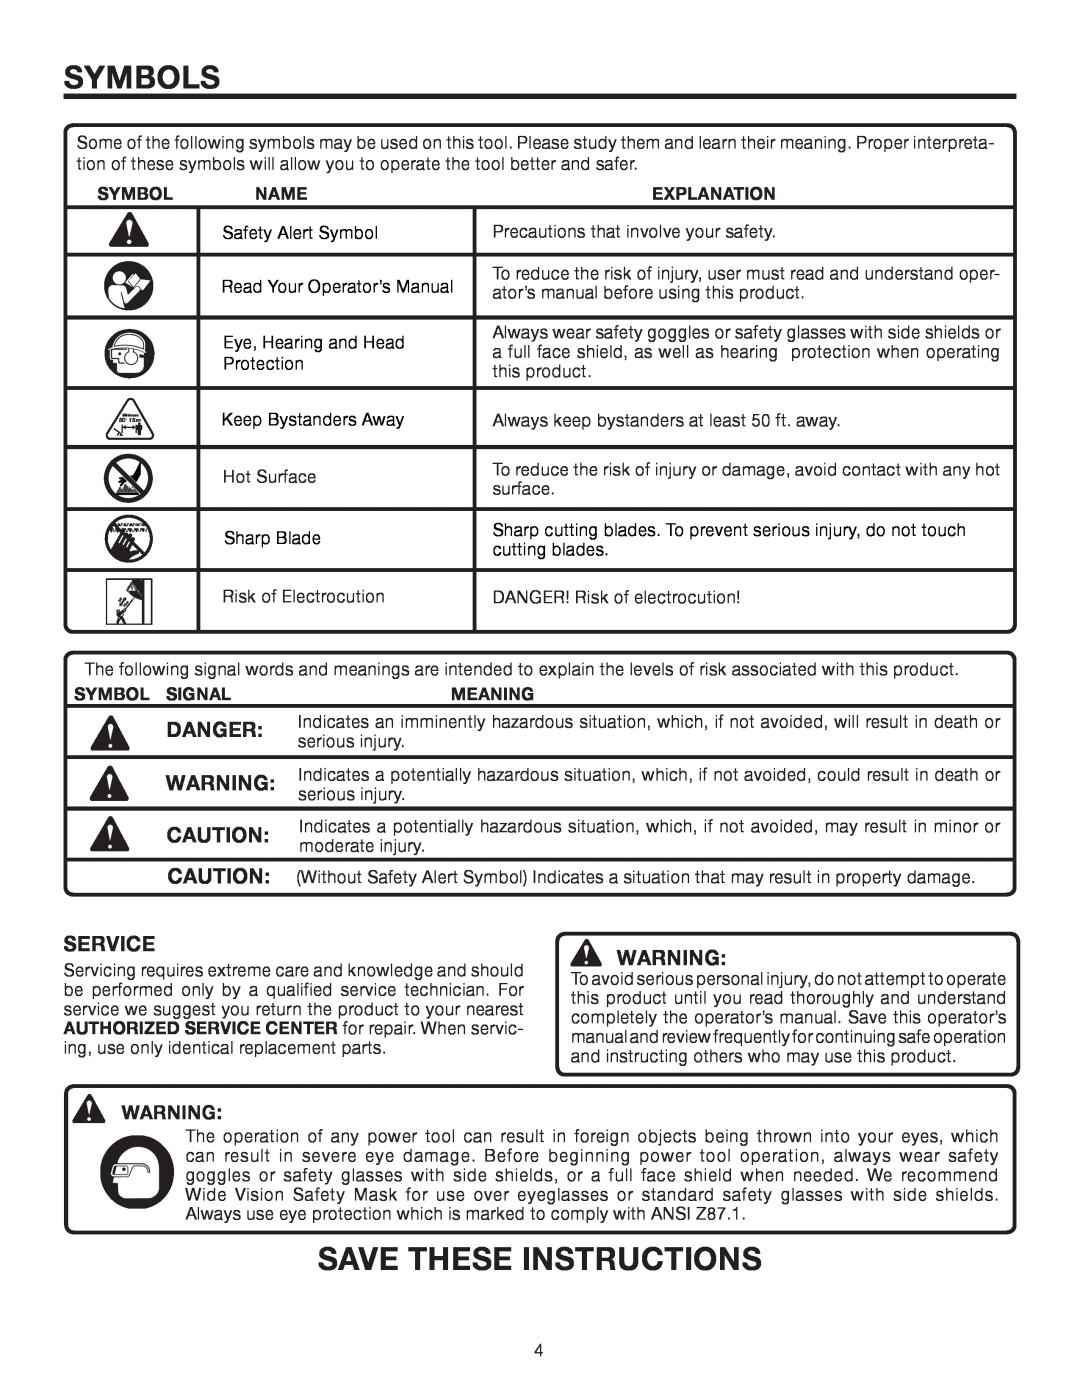 Ryobi UT15703A manual Symbols, Save These Instructions, Danger, Service, Name, Explanation, Symbol Signal, Meaning 